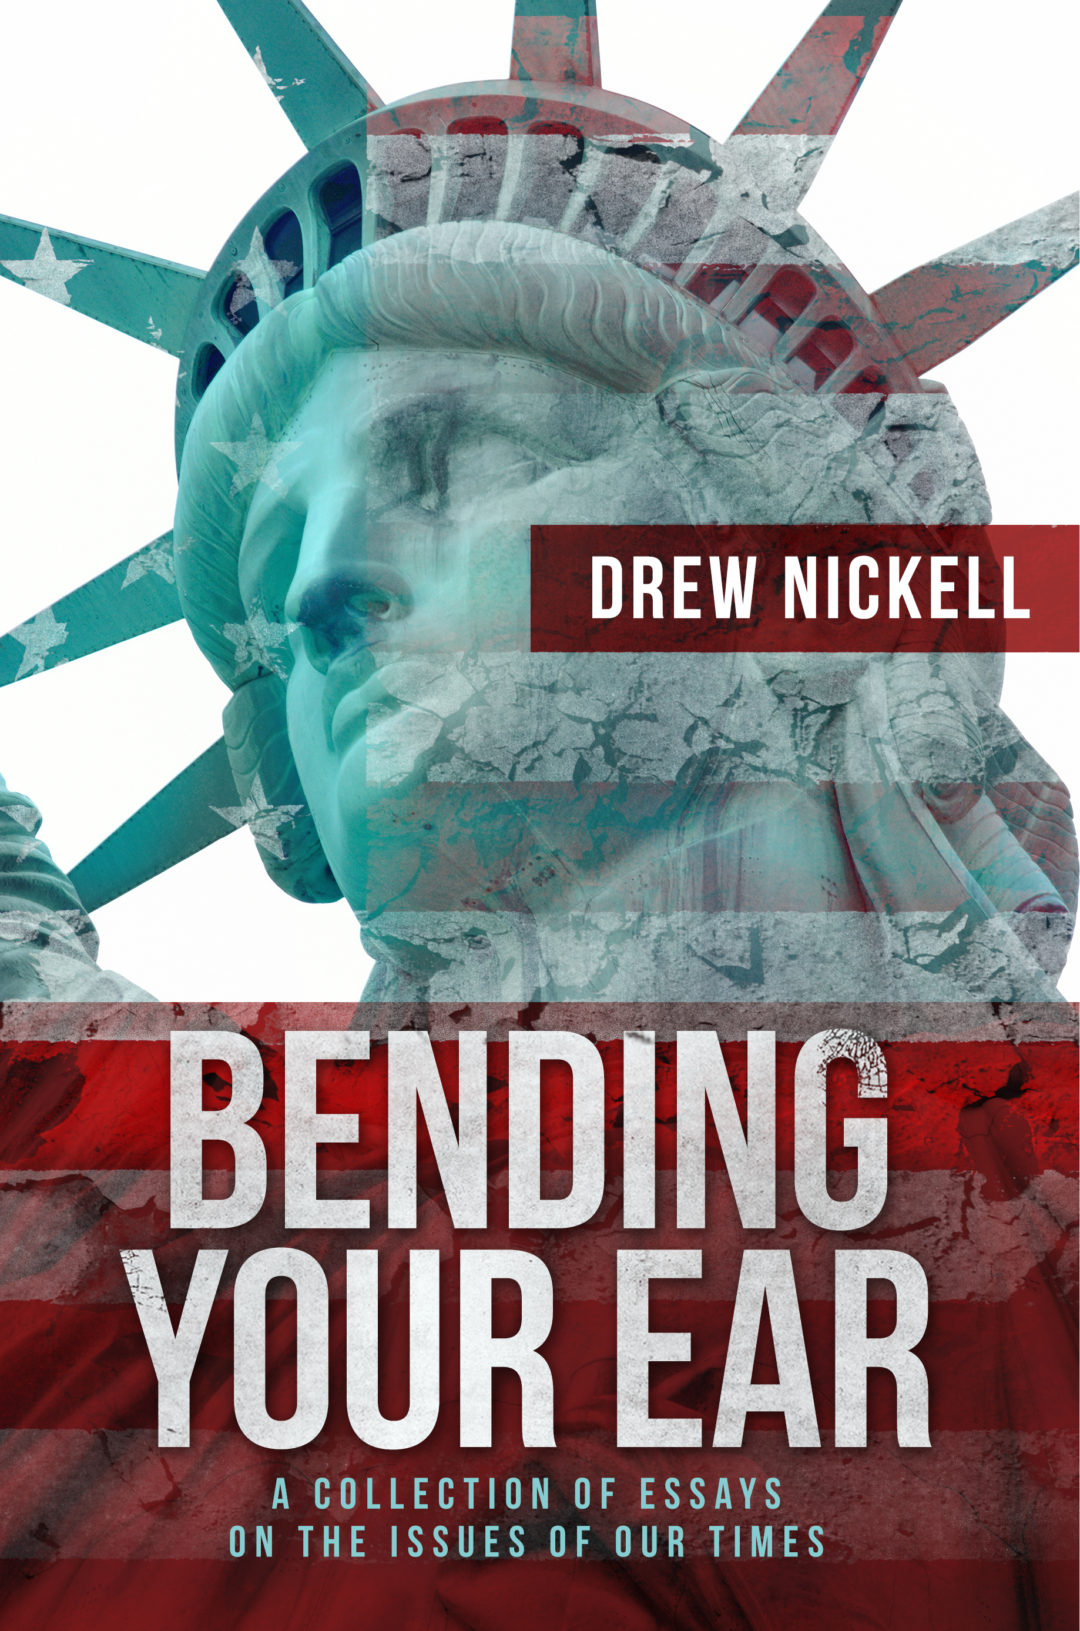 Bending Your Ear—A Collection of Essays on the Issues of Our Times